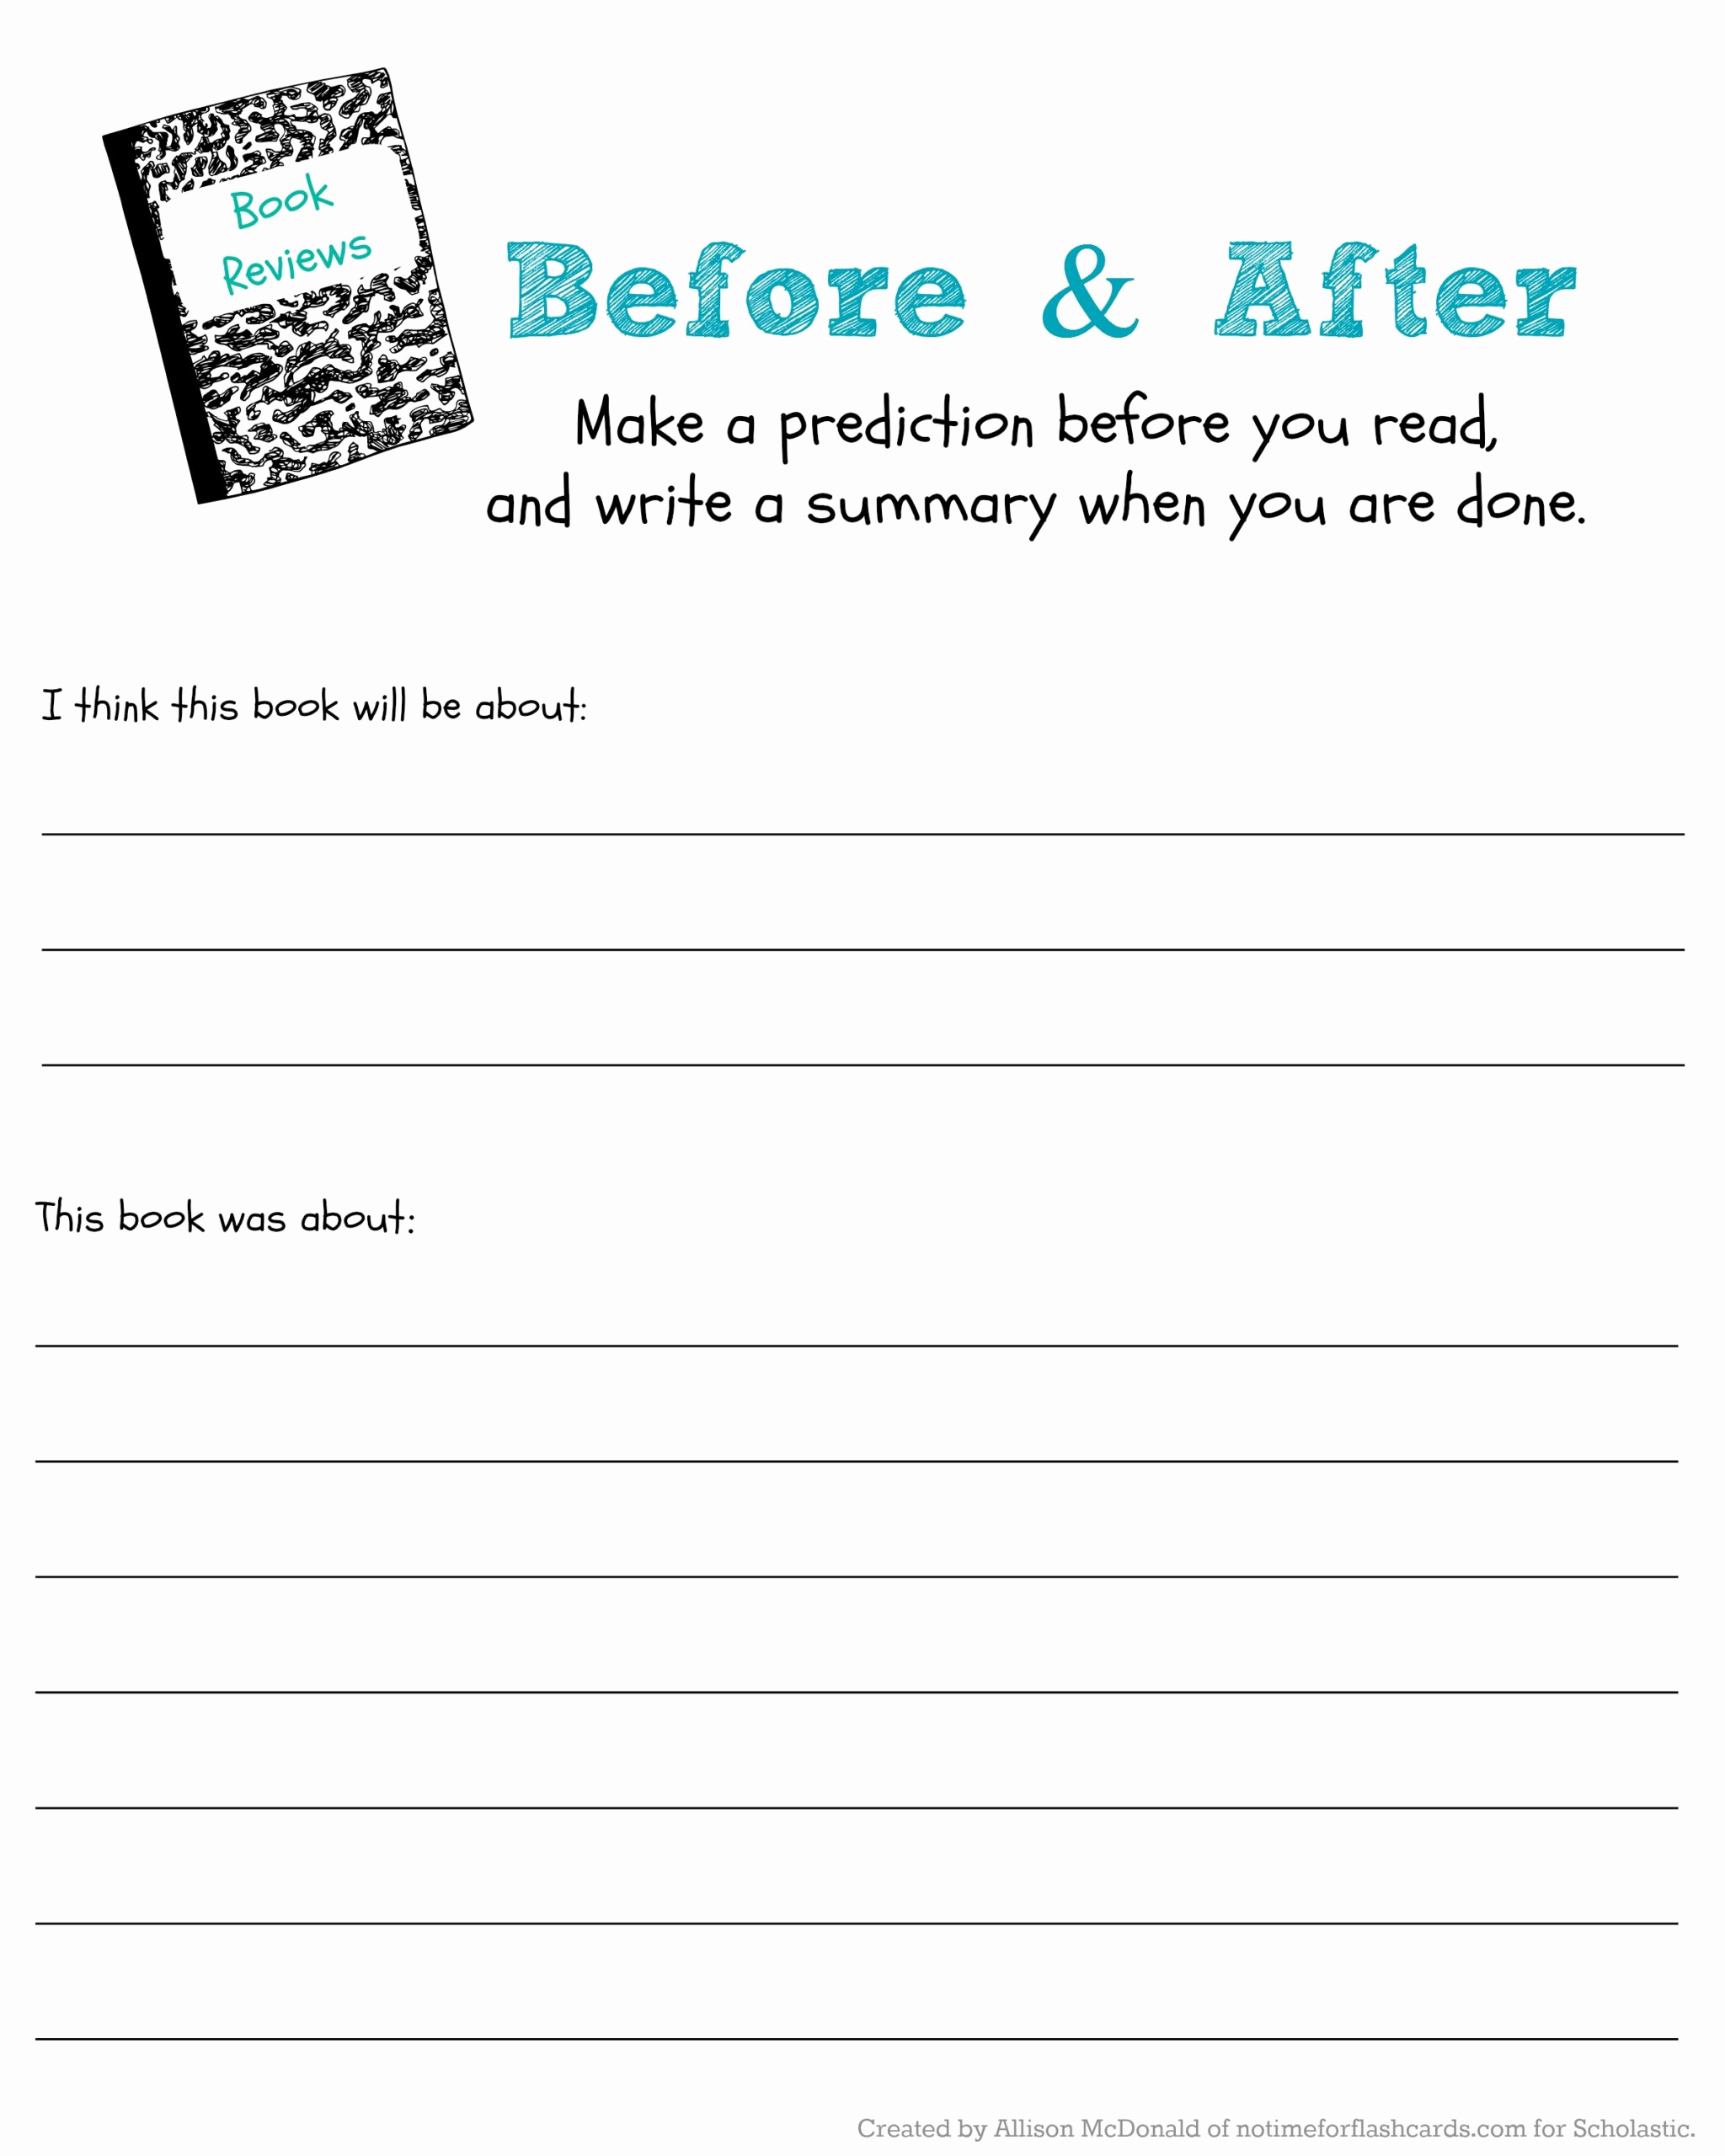 Prediction Worksheets for 3rd Grade Luxury 20 Prediction Worksheets for 3rd Grade